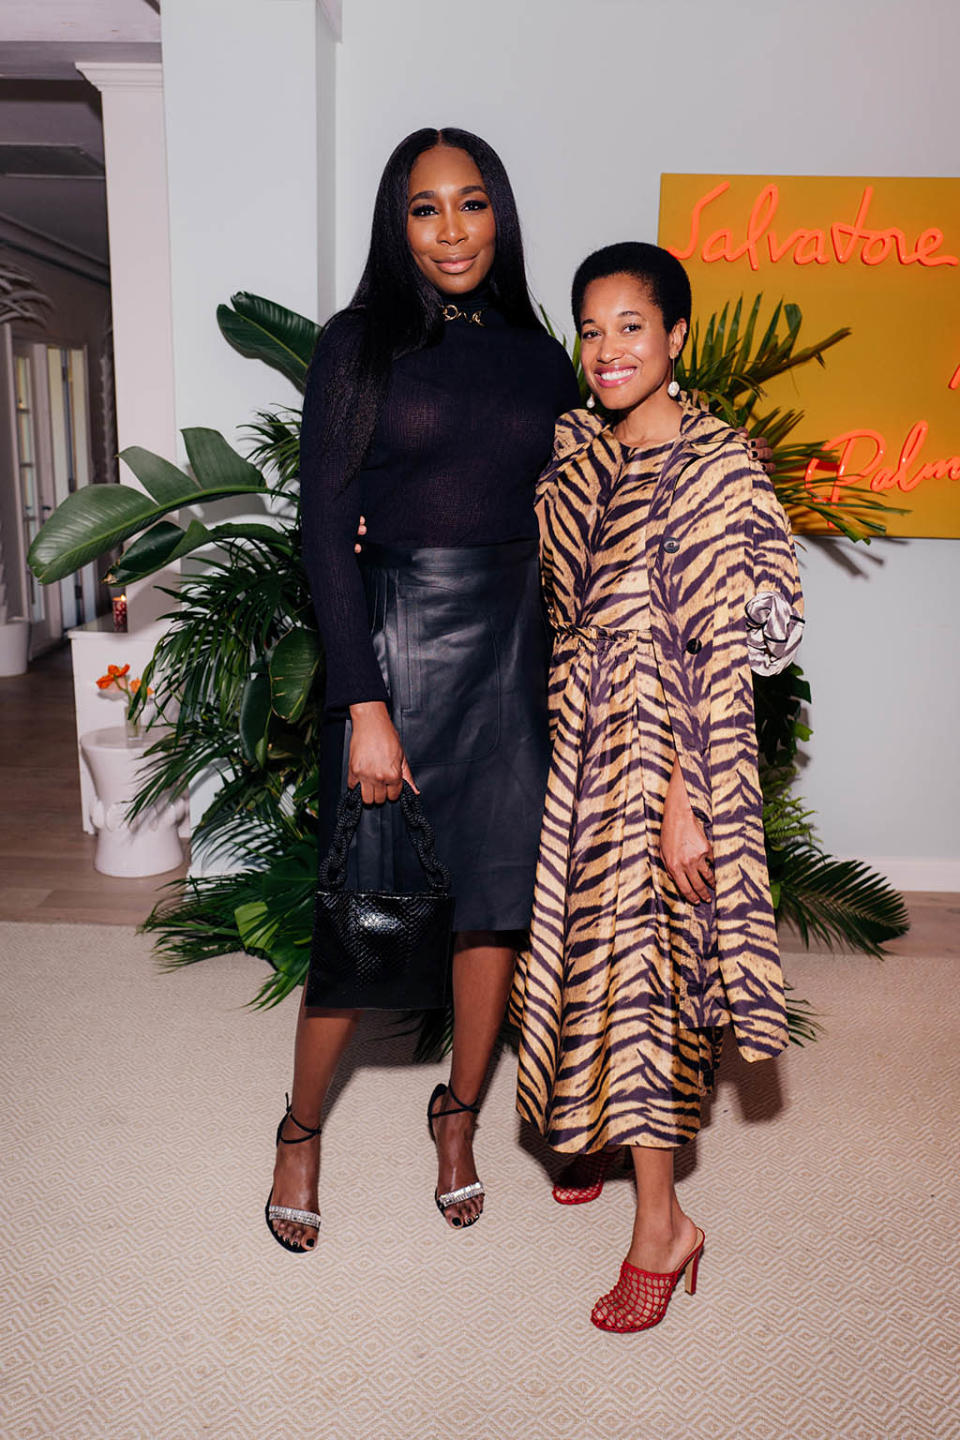 (LR) Venus Williams and Tamu McPherson at the reopening of Salvatore Ferragamo in Palm Beach, Florida on May 11, 2022.